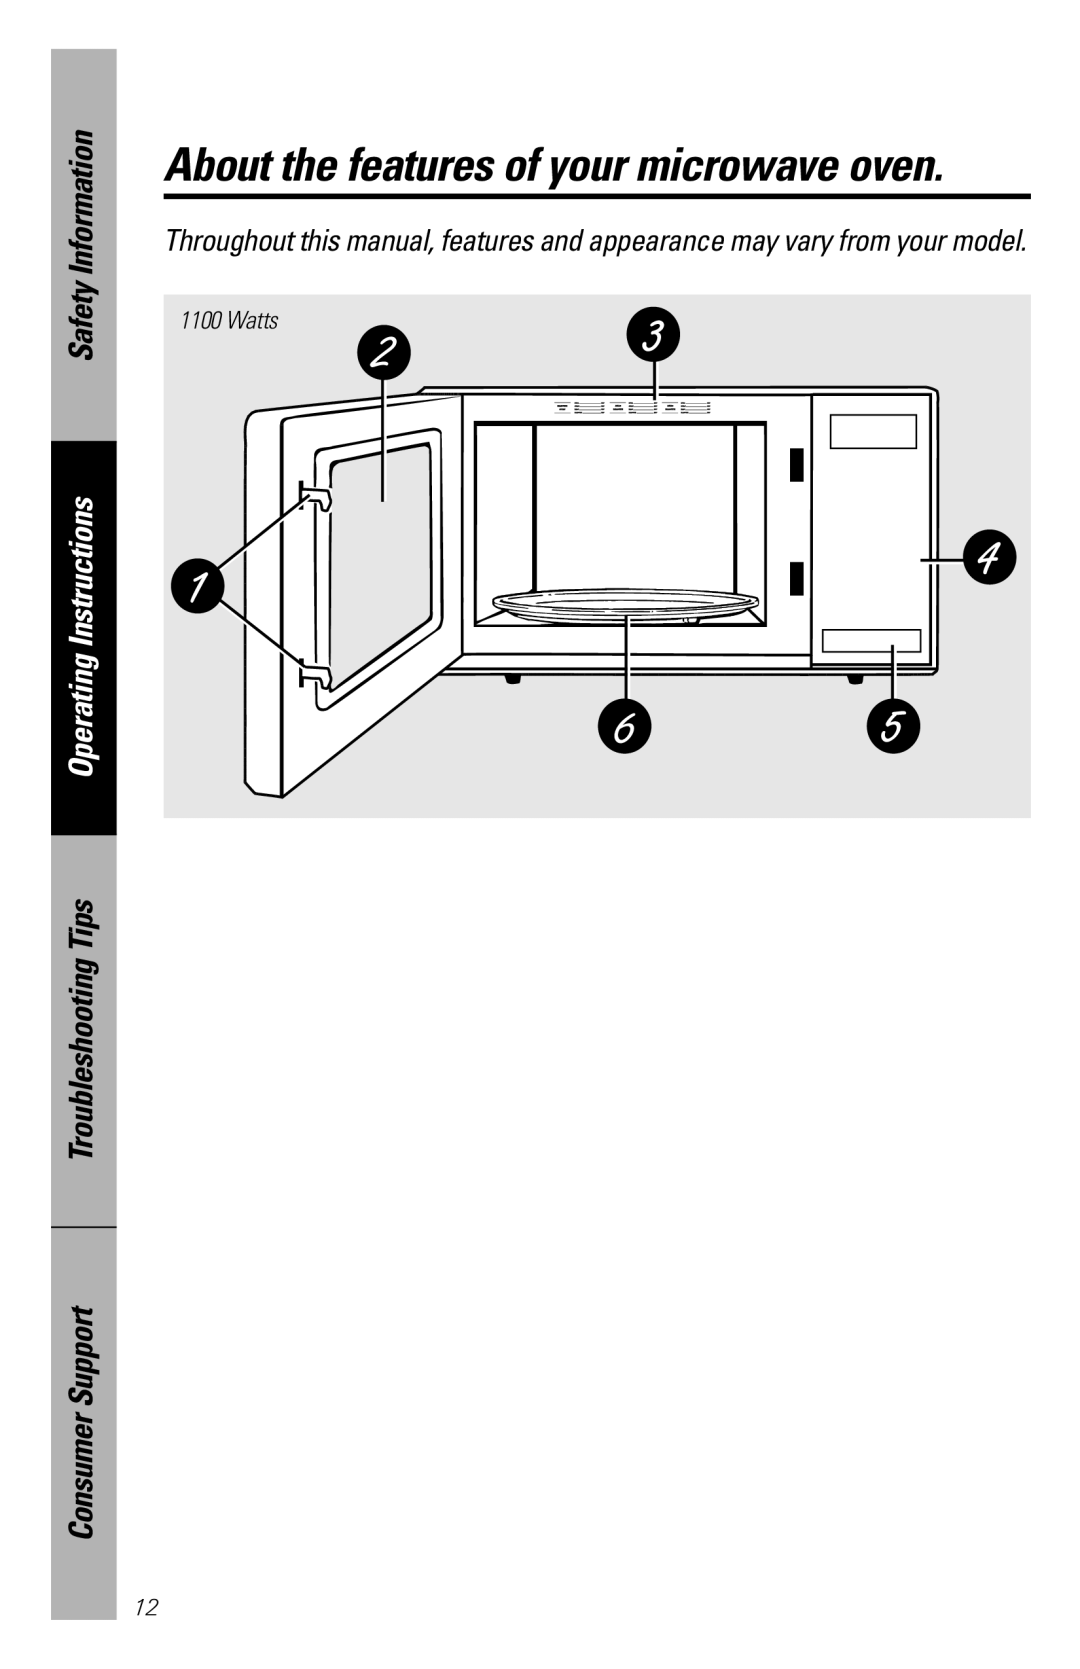 GE JES1136 owner manual About the features of your microwave oven, Safety Information, Operating Instructions 